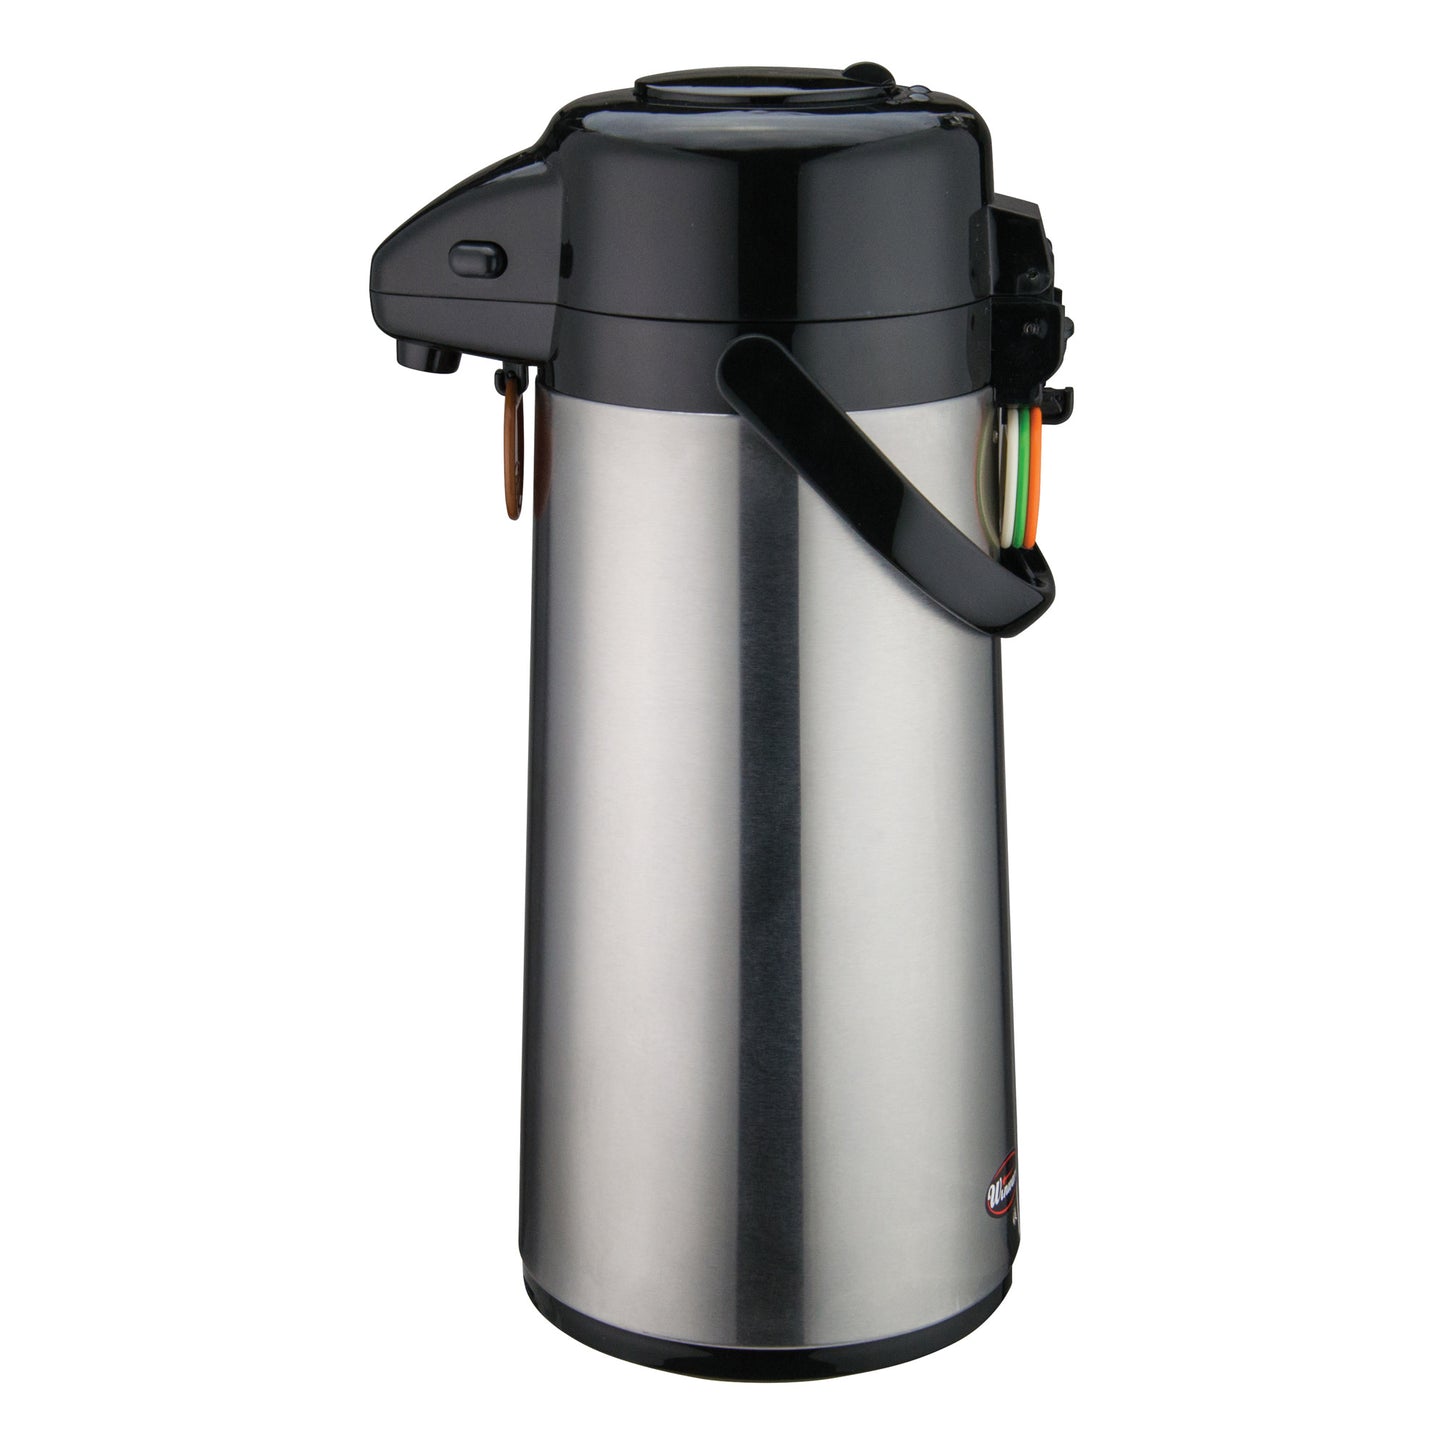 AP-522 - Glass Lined Airpot with Push Button Top, Stainless Steel Body - 2.2 Liter